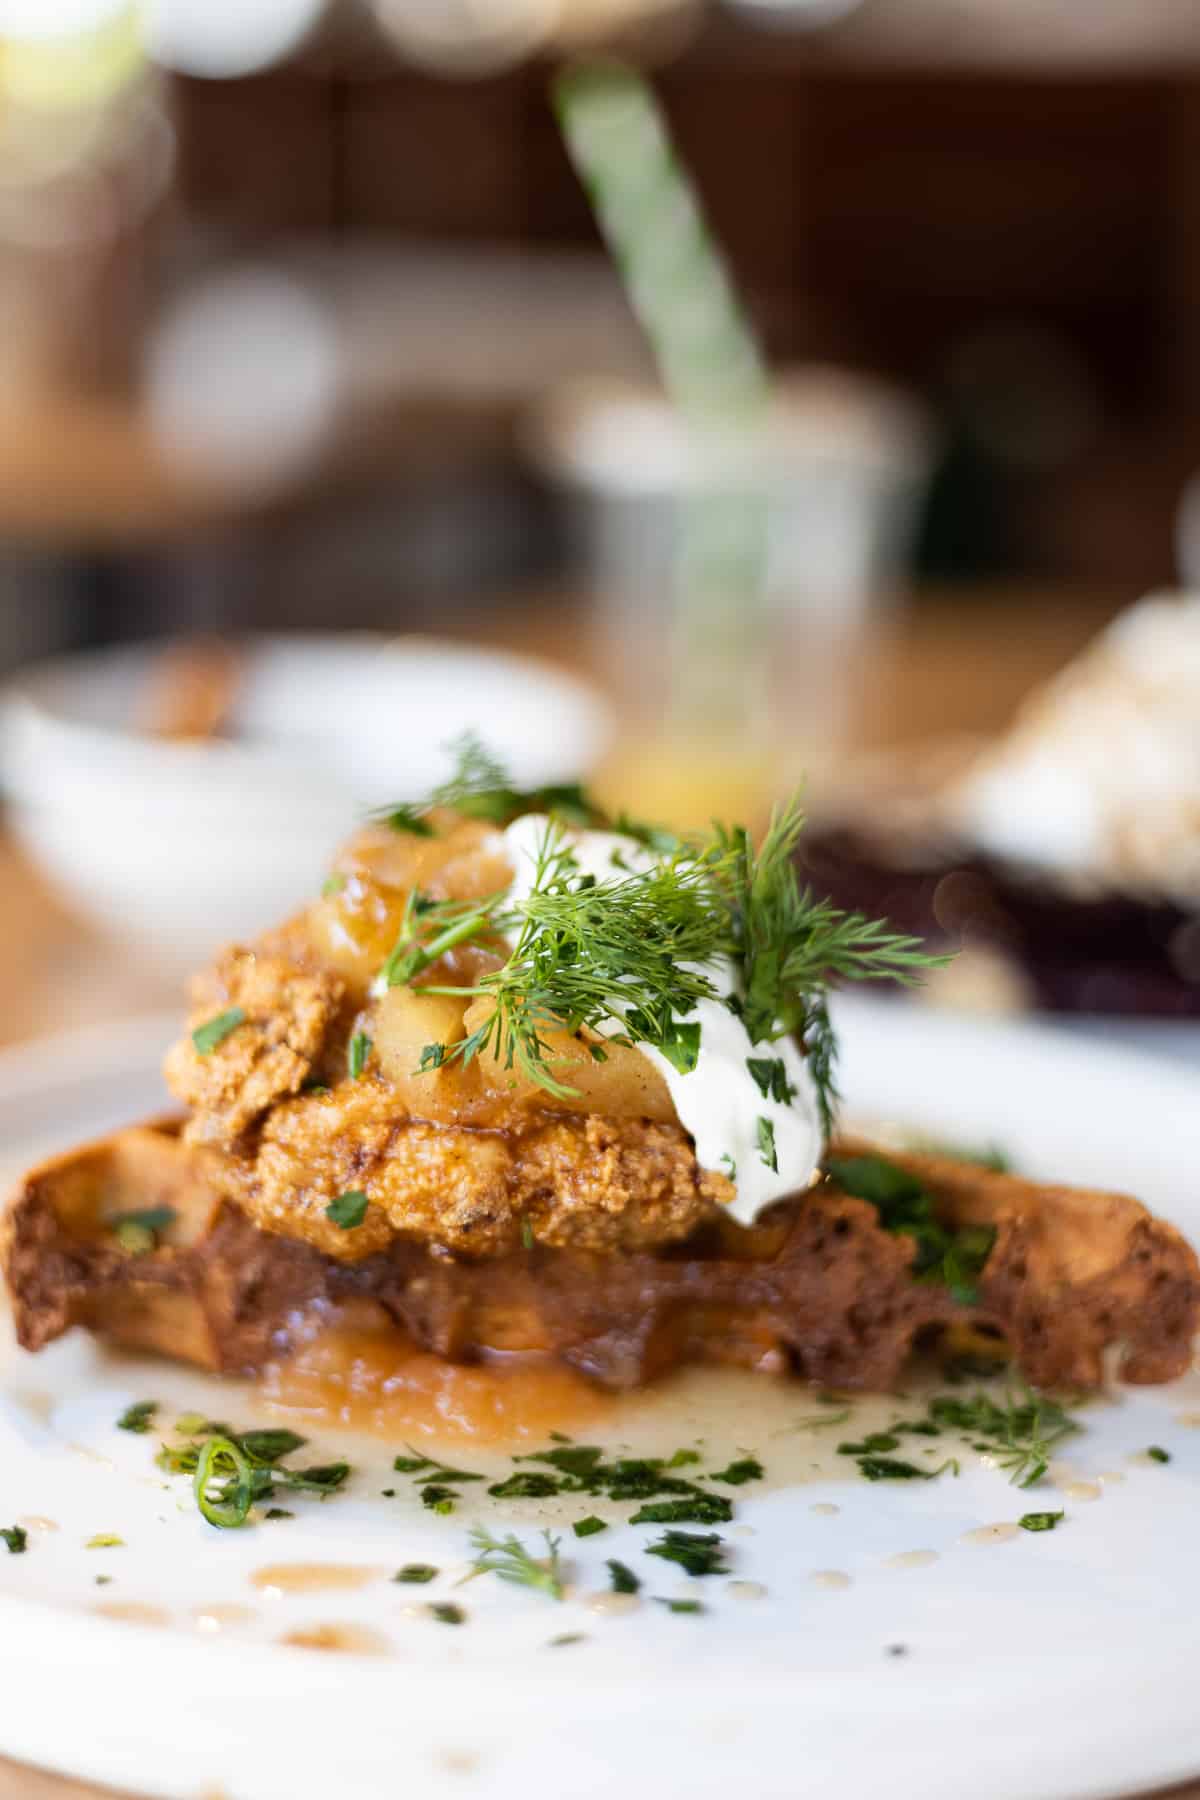 potato waffle topped with fried chicken, baked apples, sour cream and fresh herbs laced with plenty of dill by the Hayden